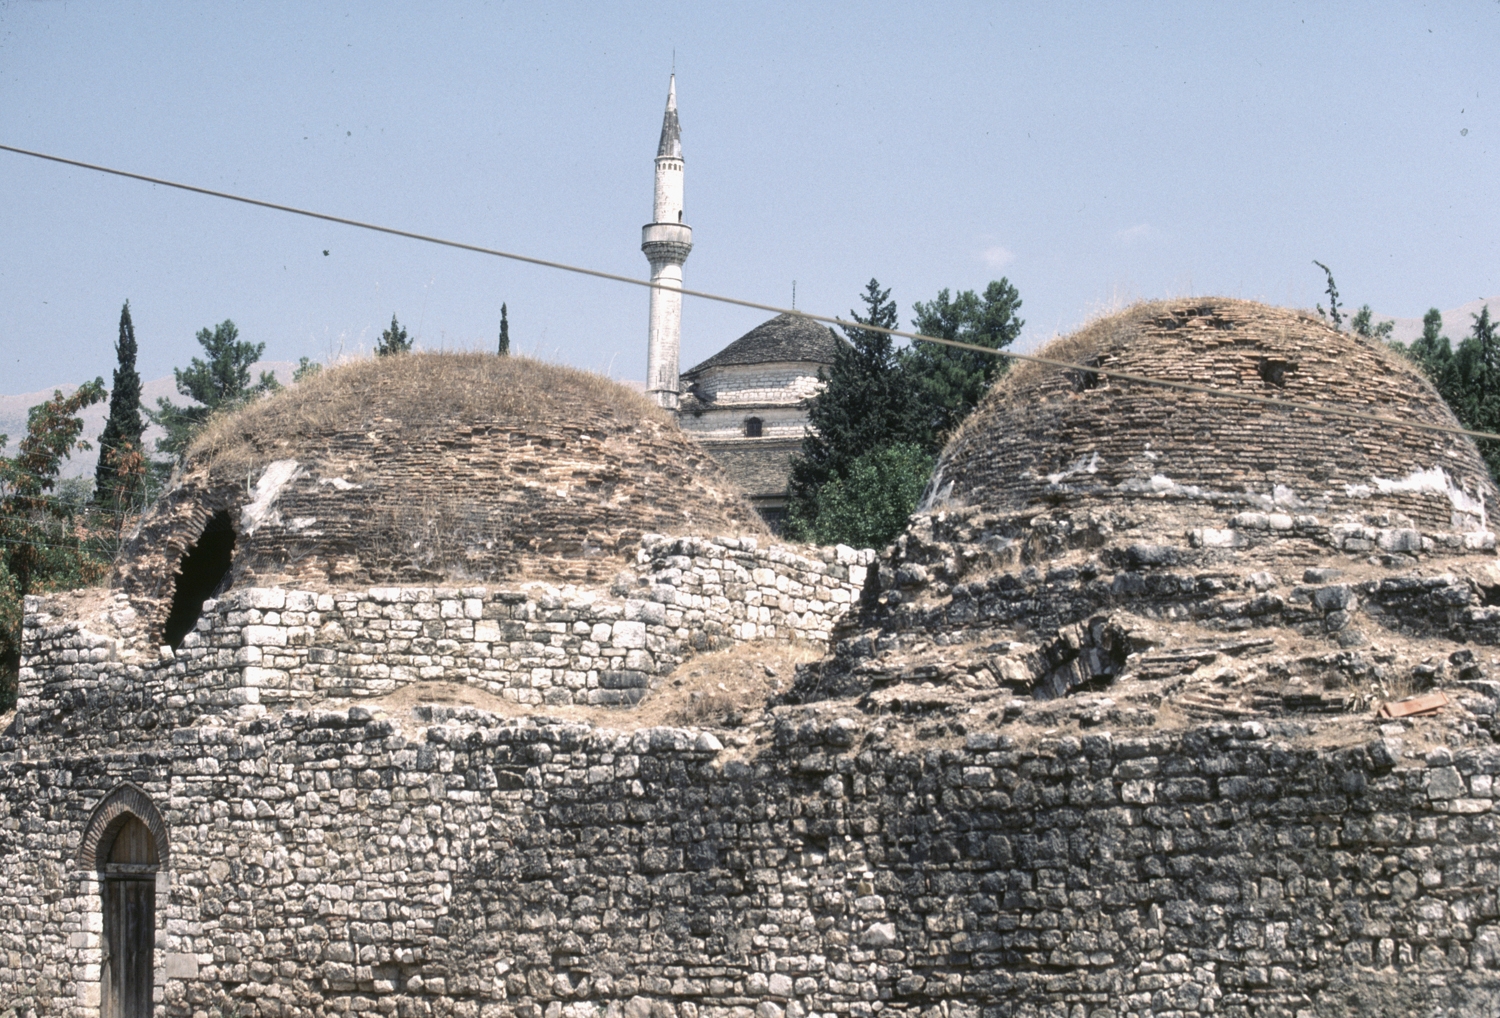 View of two domes, with the Aslan Pasha Mosque in the background